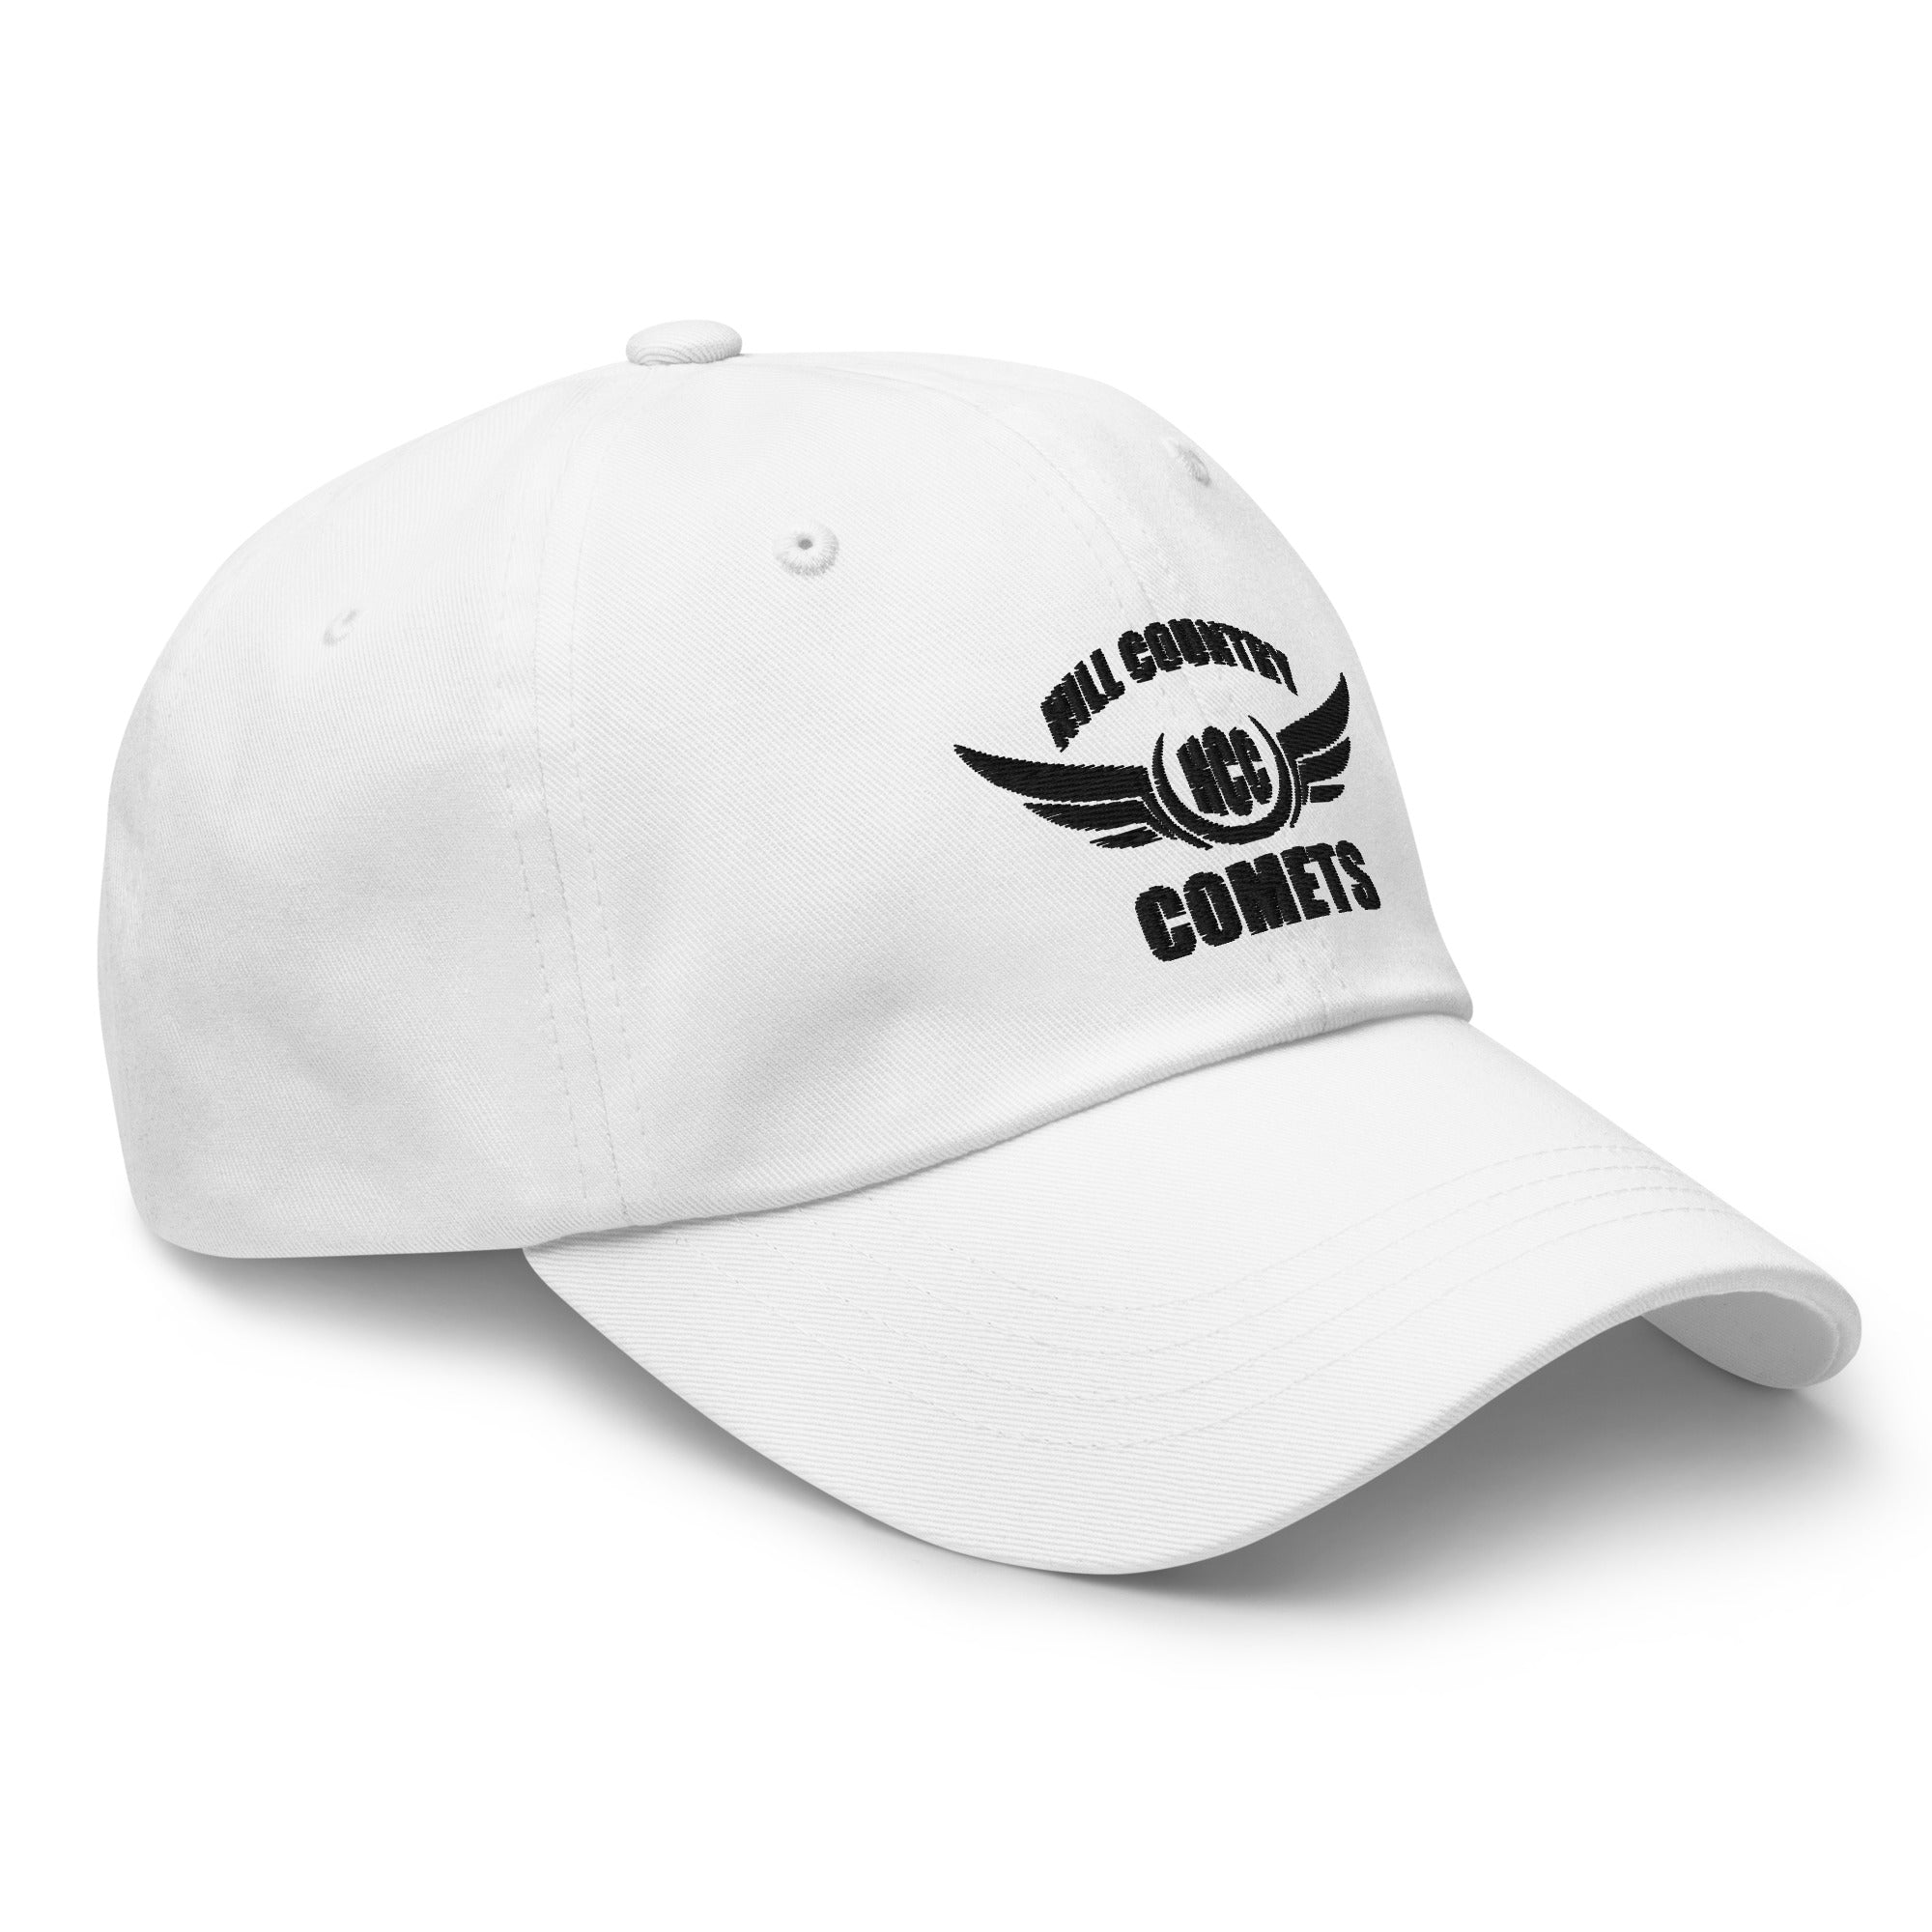 Hill Country Comets Dad hat